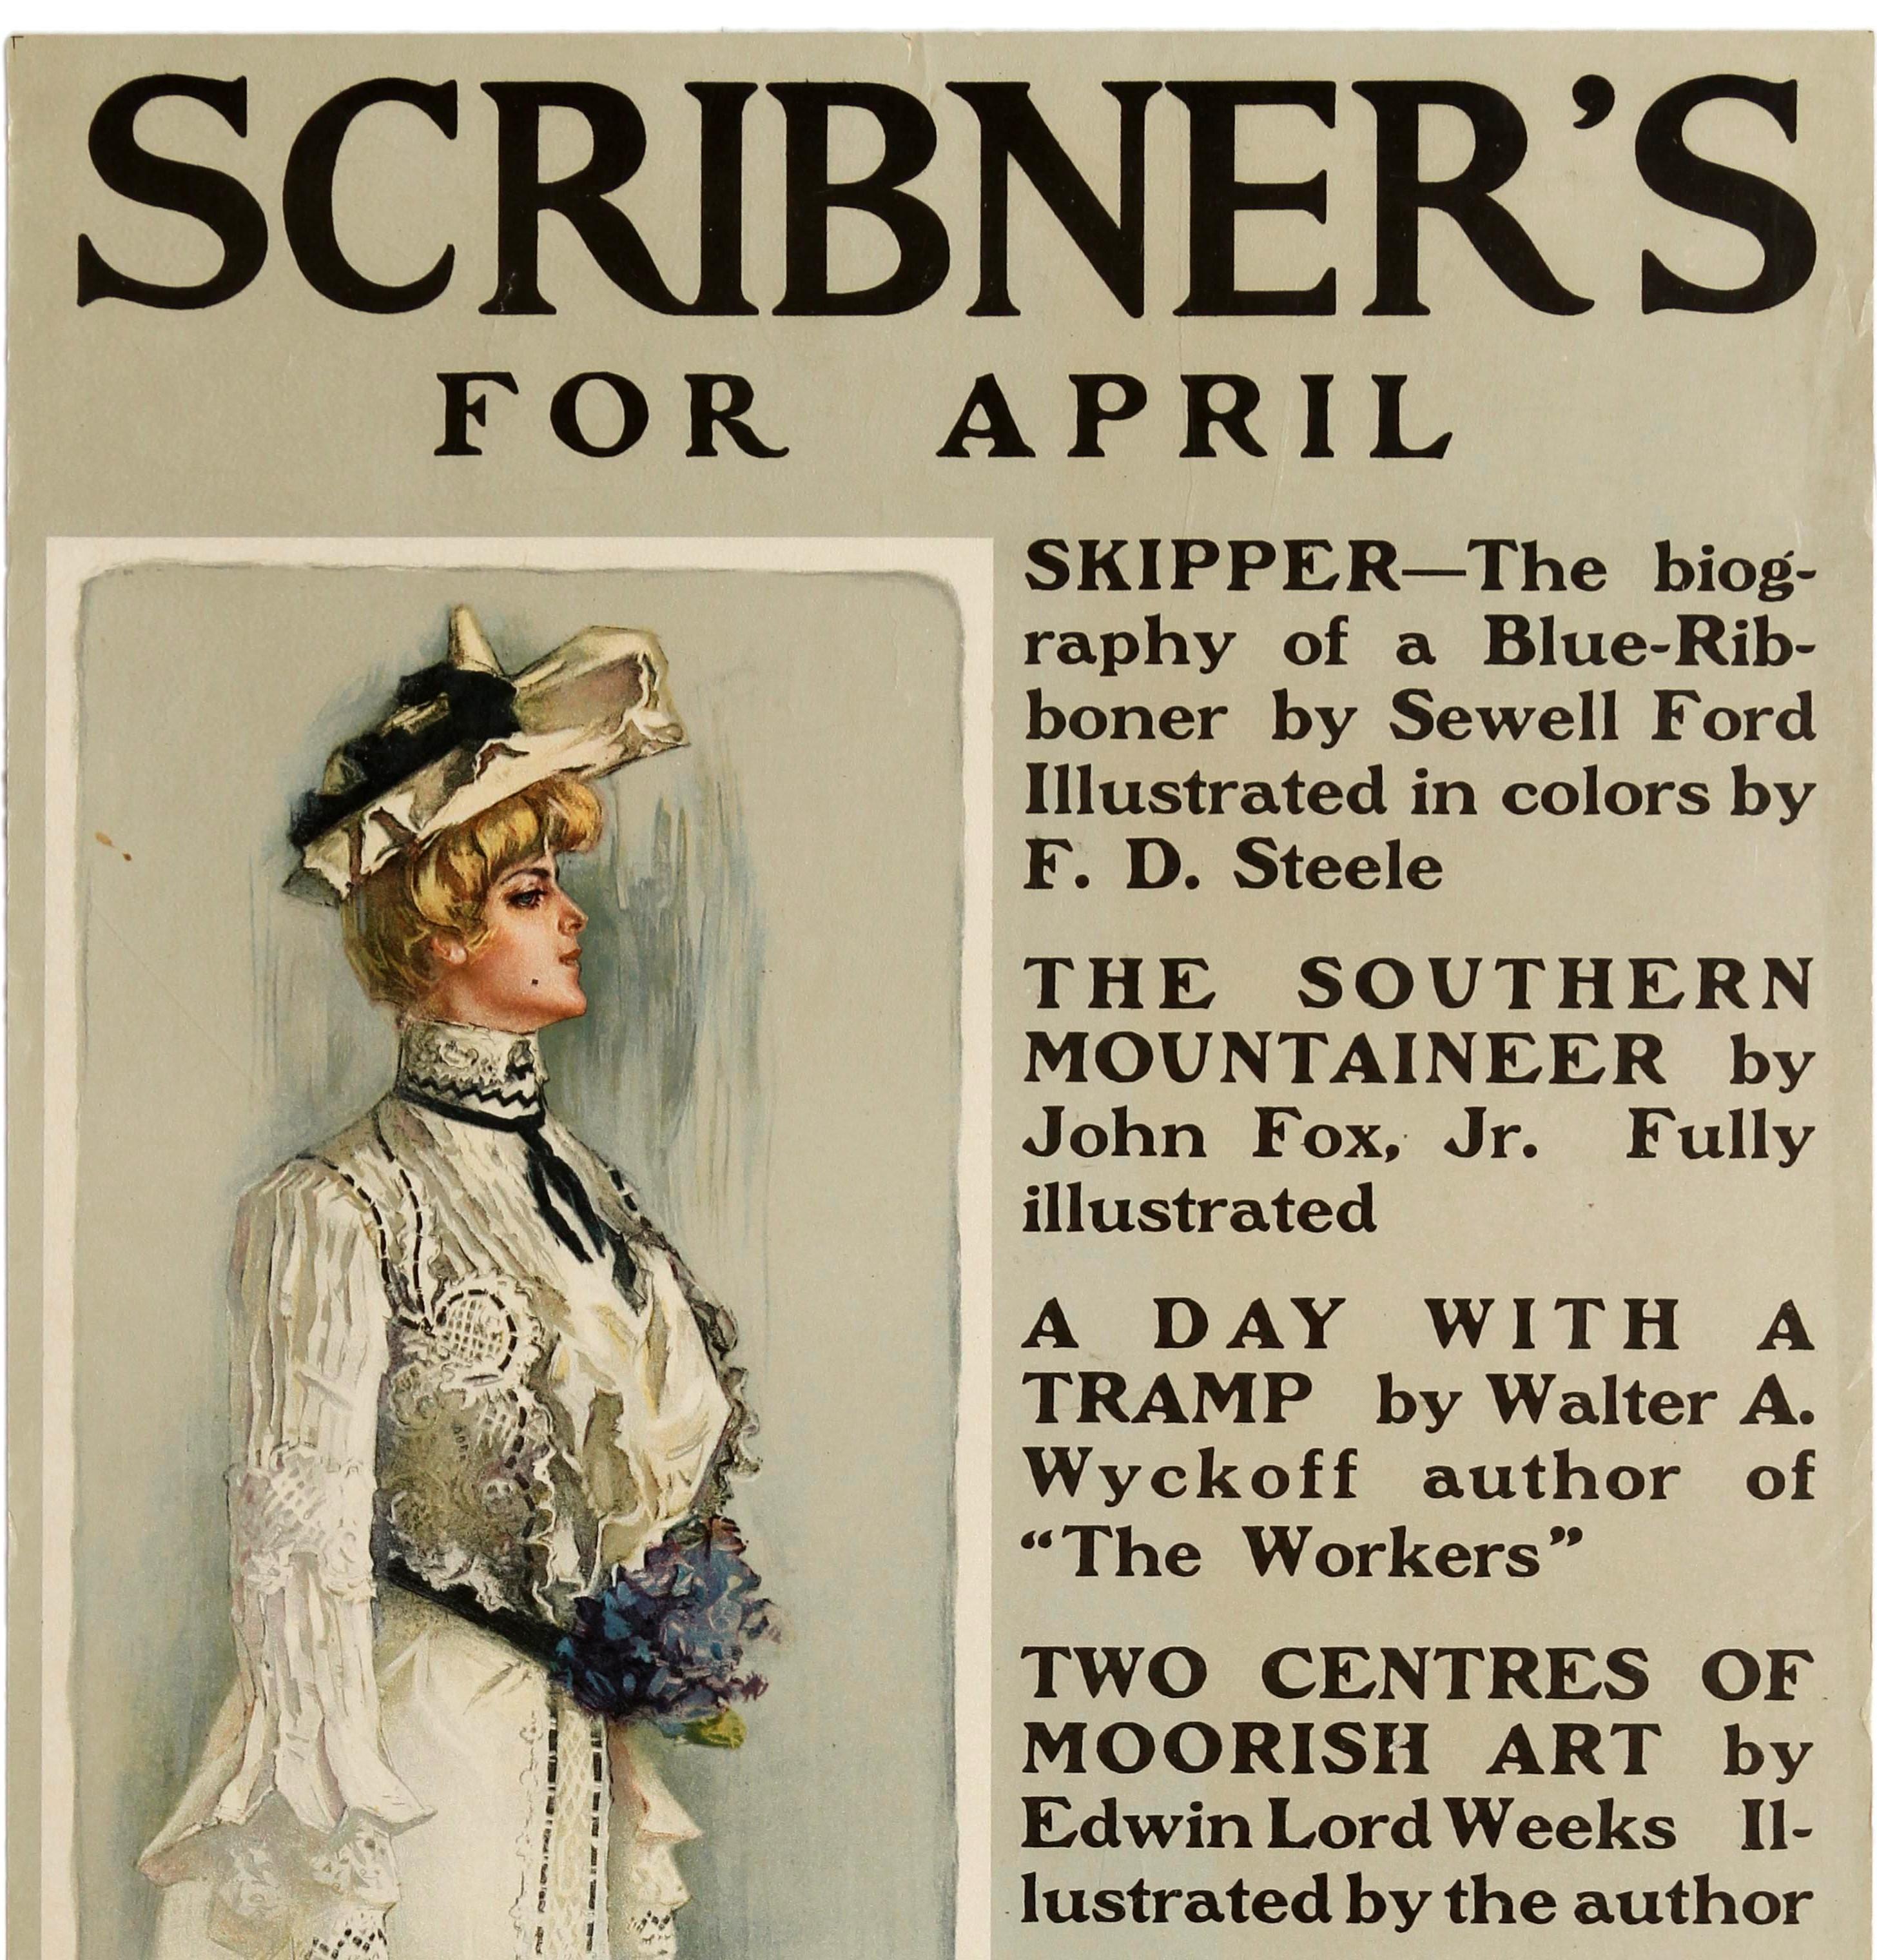 Original Antique Poster Scribner's For April 1901 Illustrated Magazine Stories - Print by Will Grefe